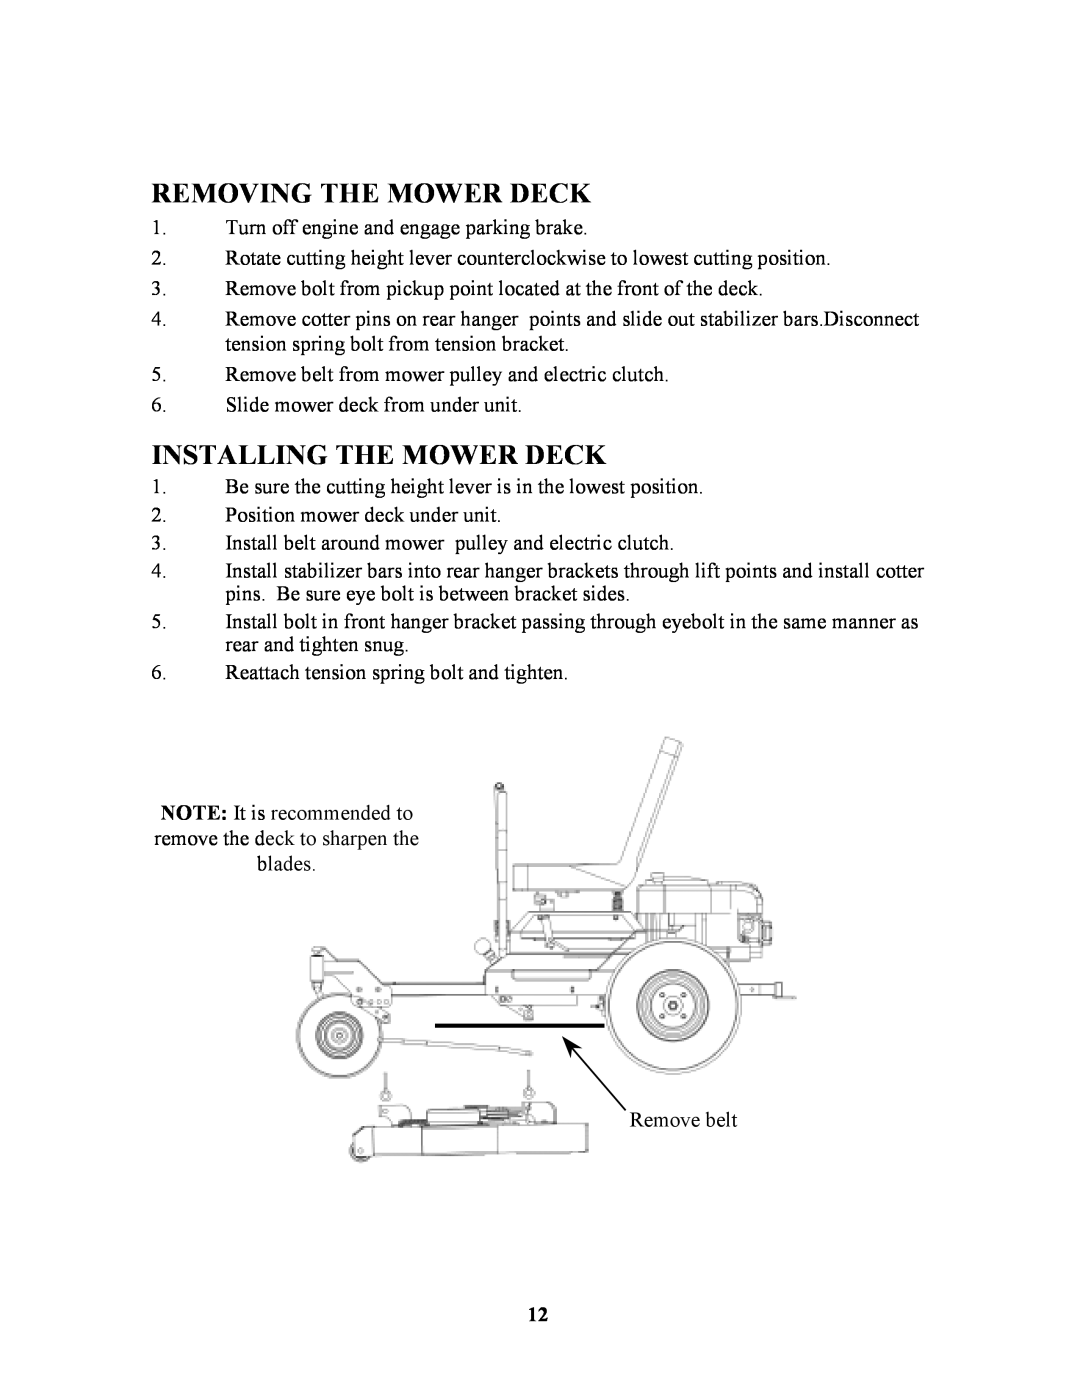 Swisher ZT2350 owner manual Removing The Mower Deck, Installing The Mower Deck 